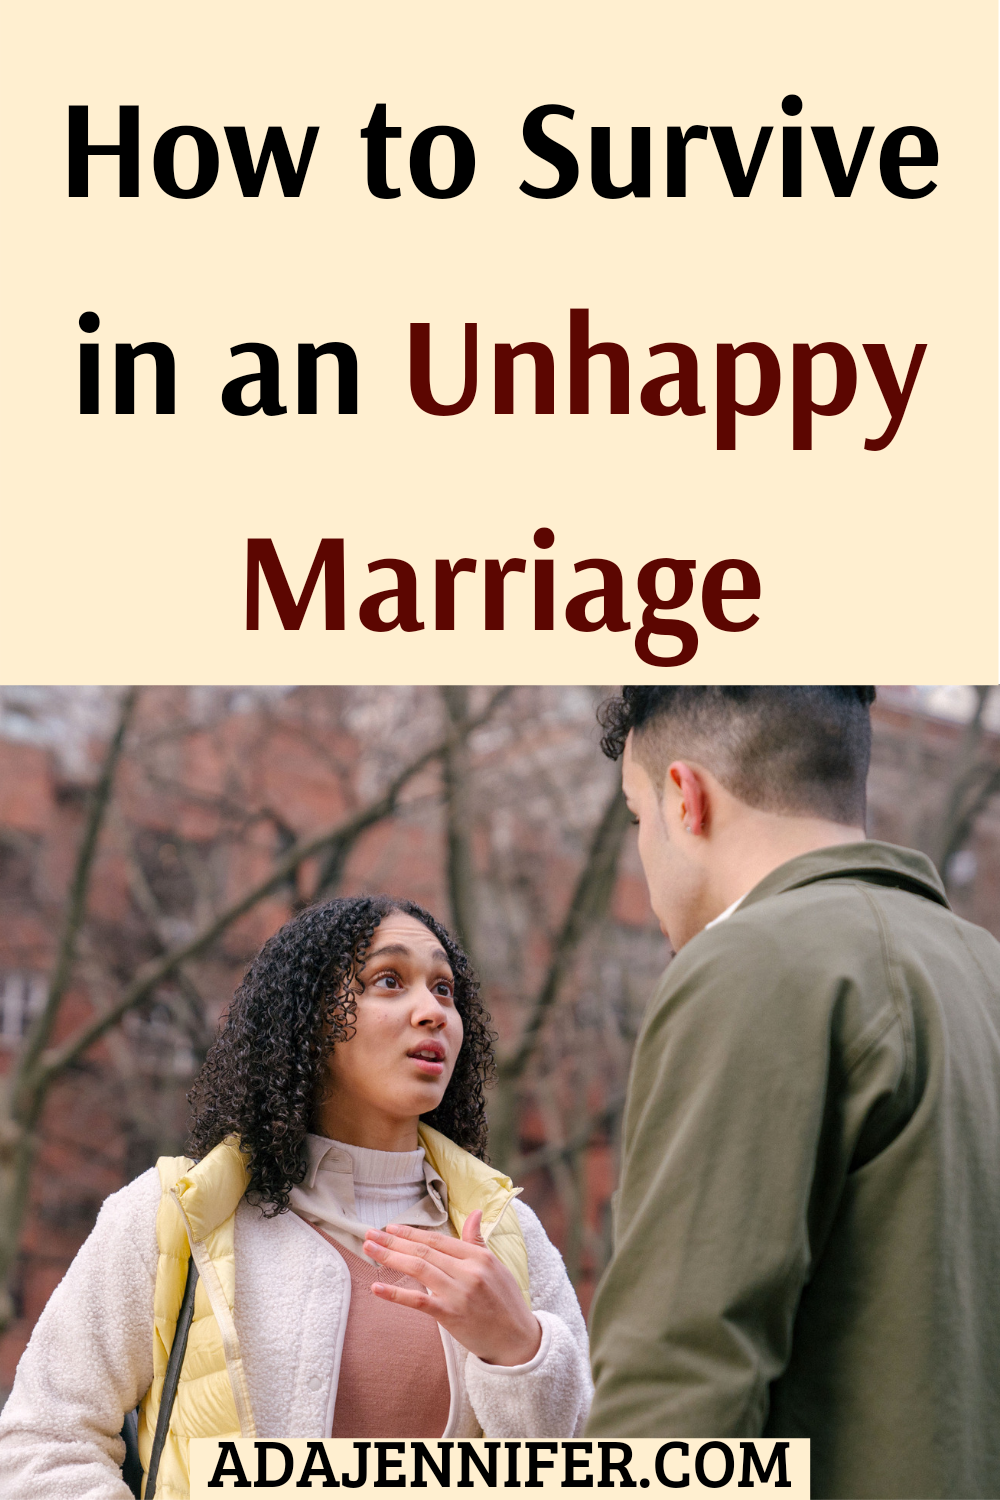 How to survive an unhappy marriage